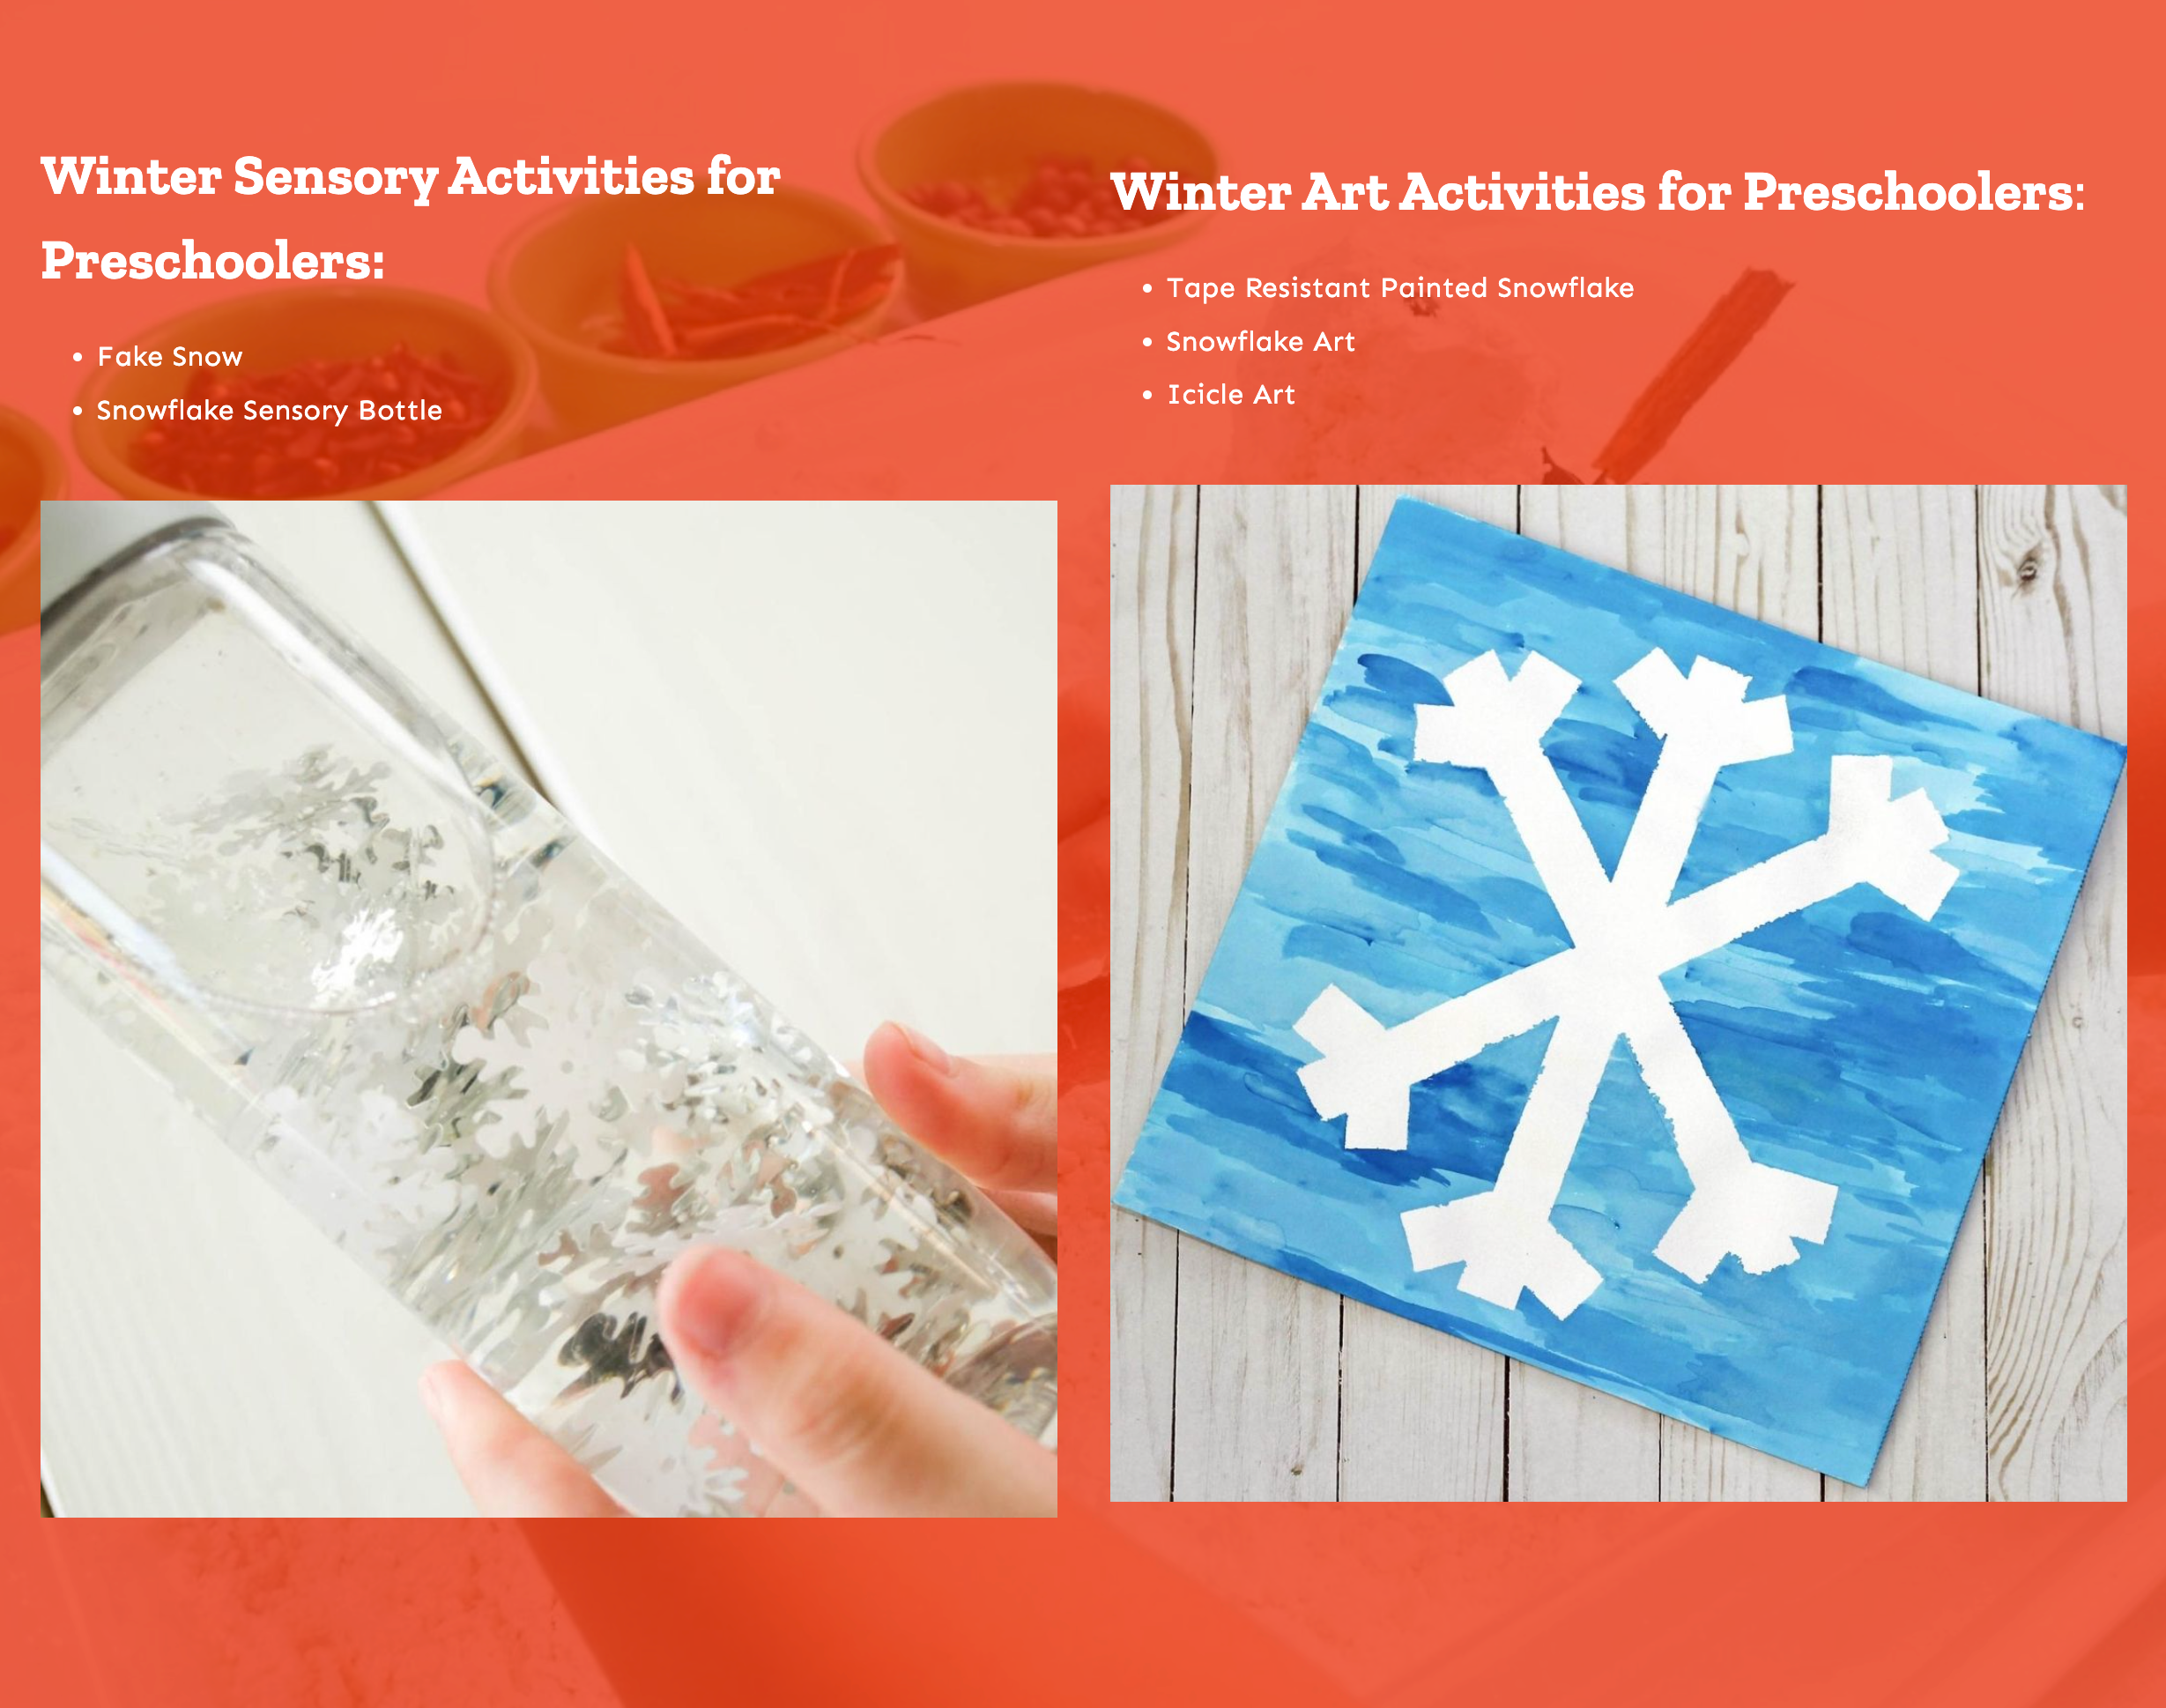 List of preschool winter sensory and art activities included in the activity plans